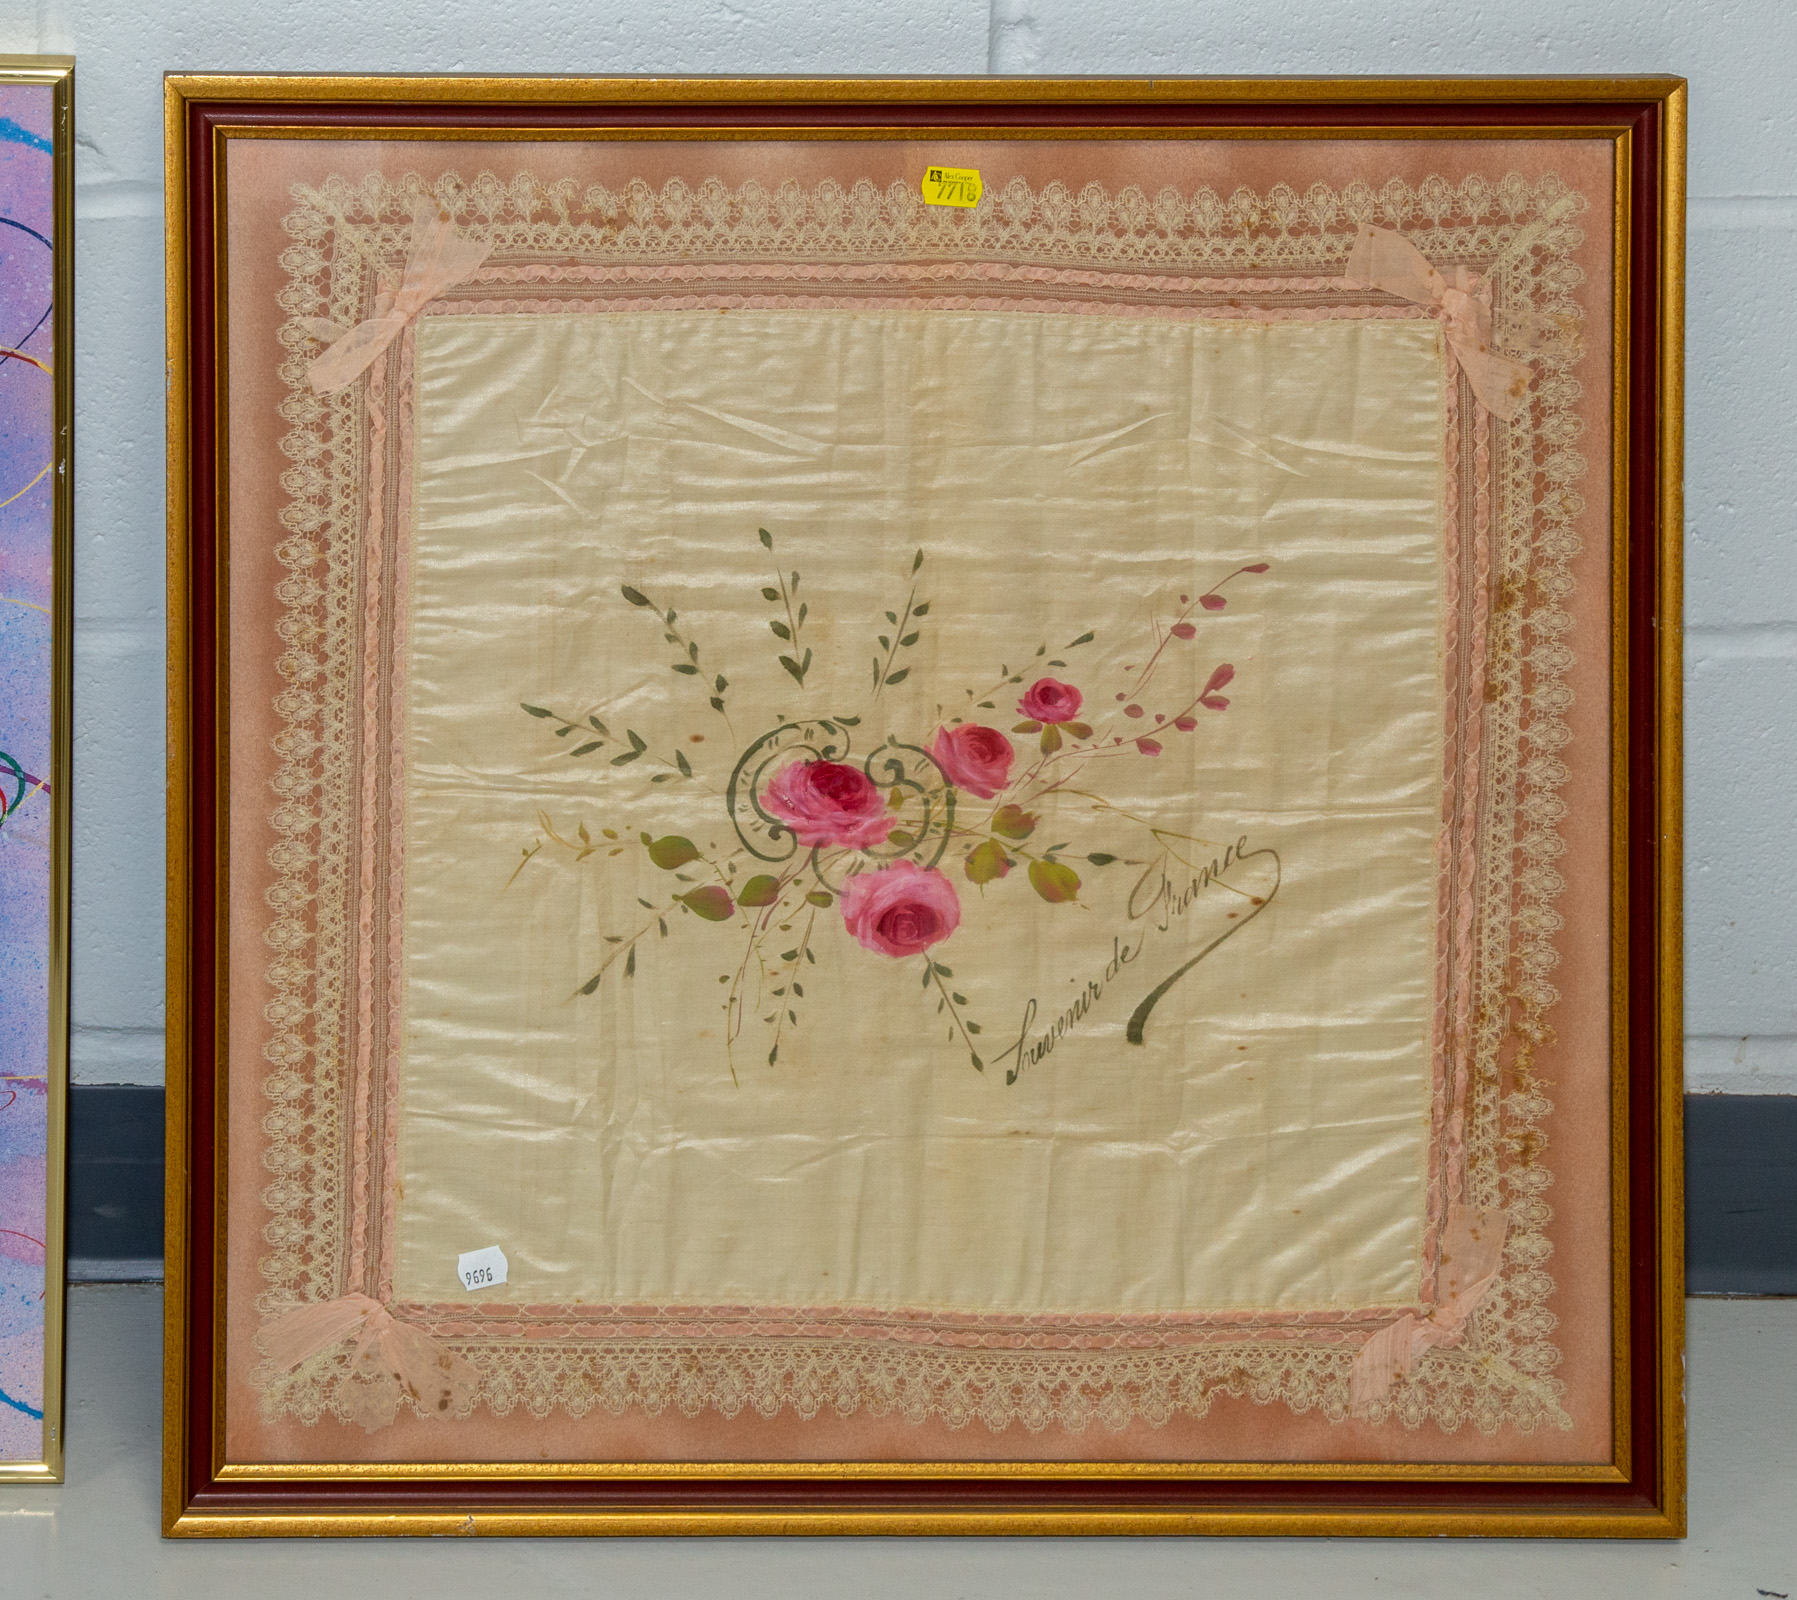 EARLY 20TH C. FRAMED FRENCH TEXTILE